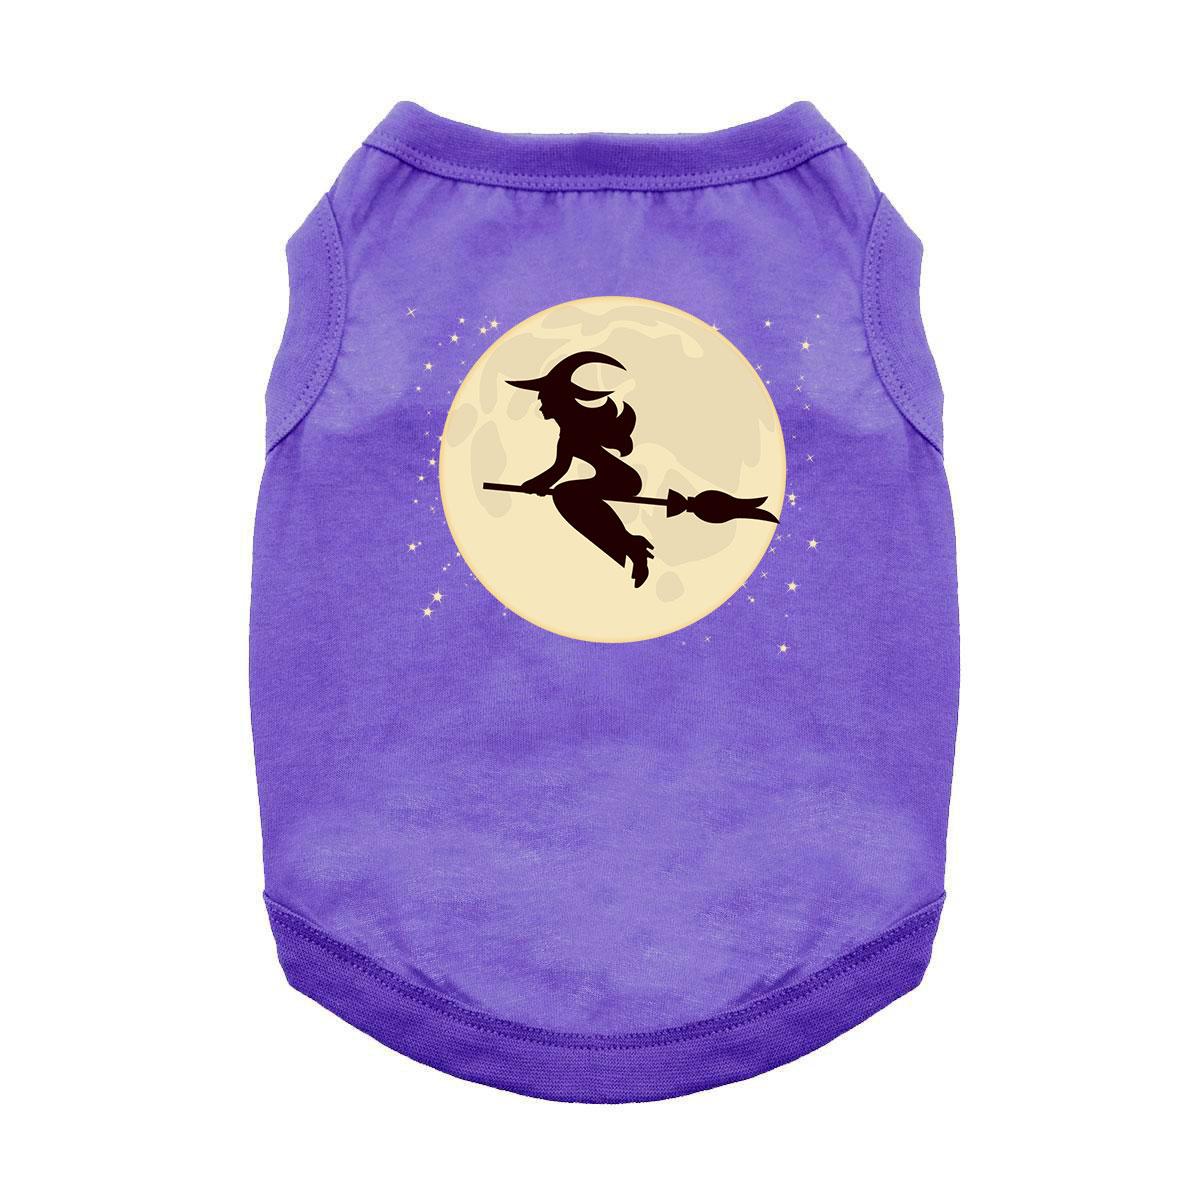 Moonlight Witch on a Broom Dog Shirt - Purple